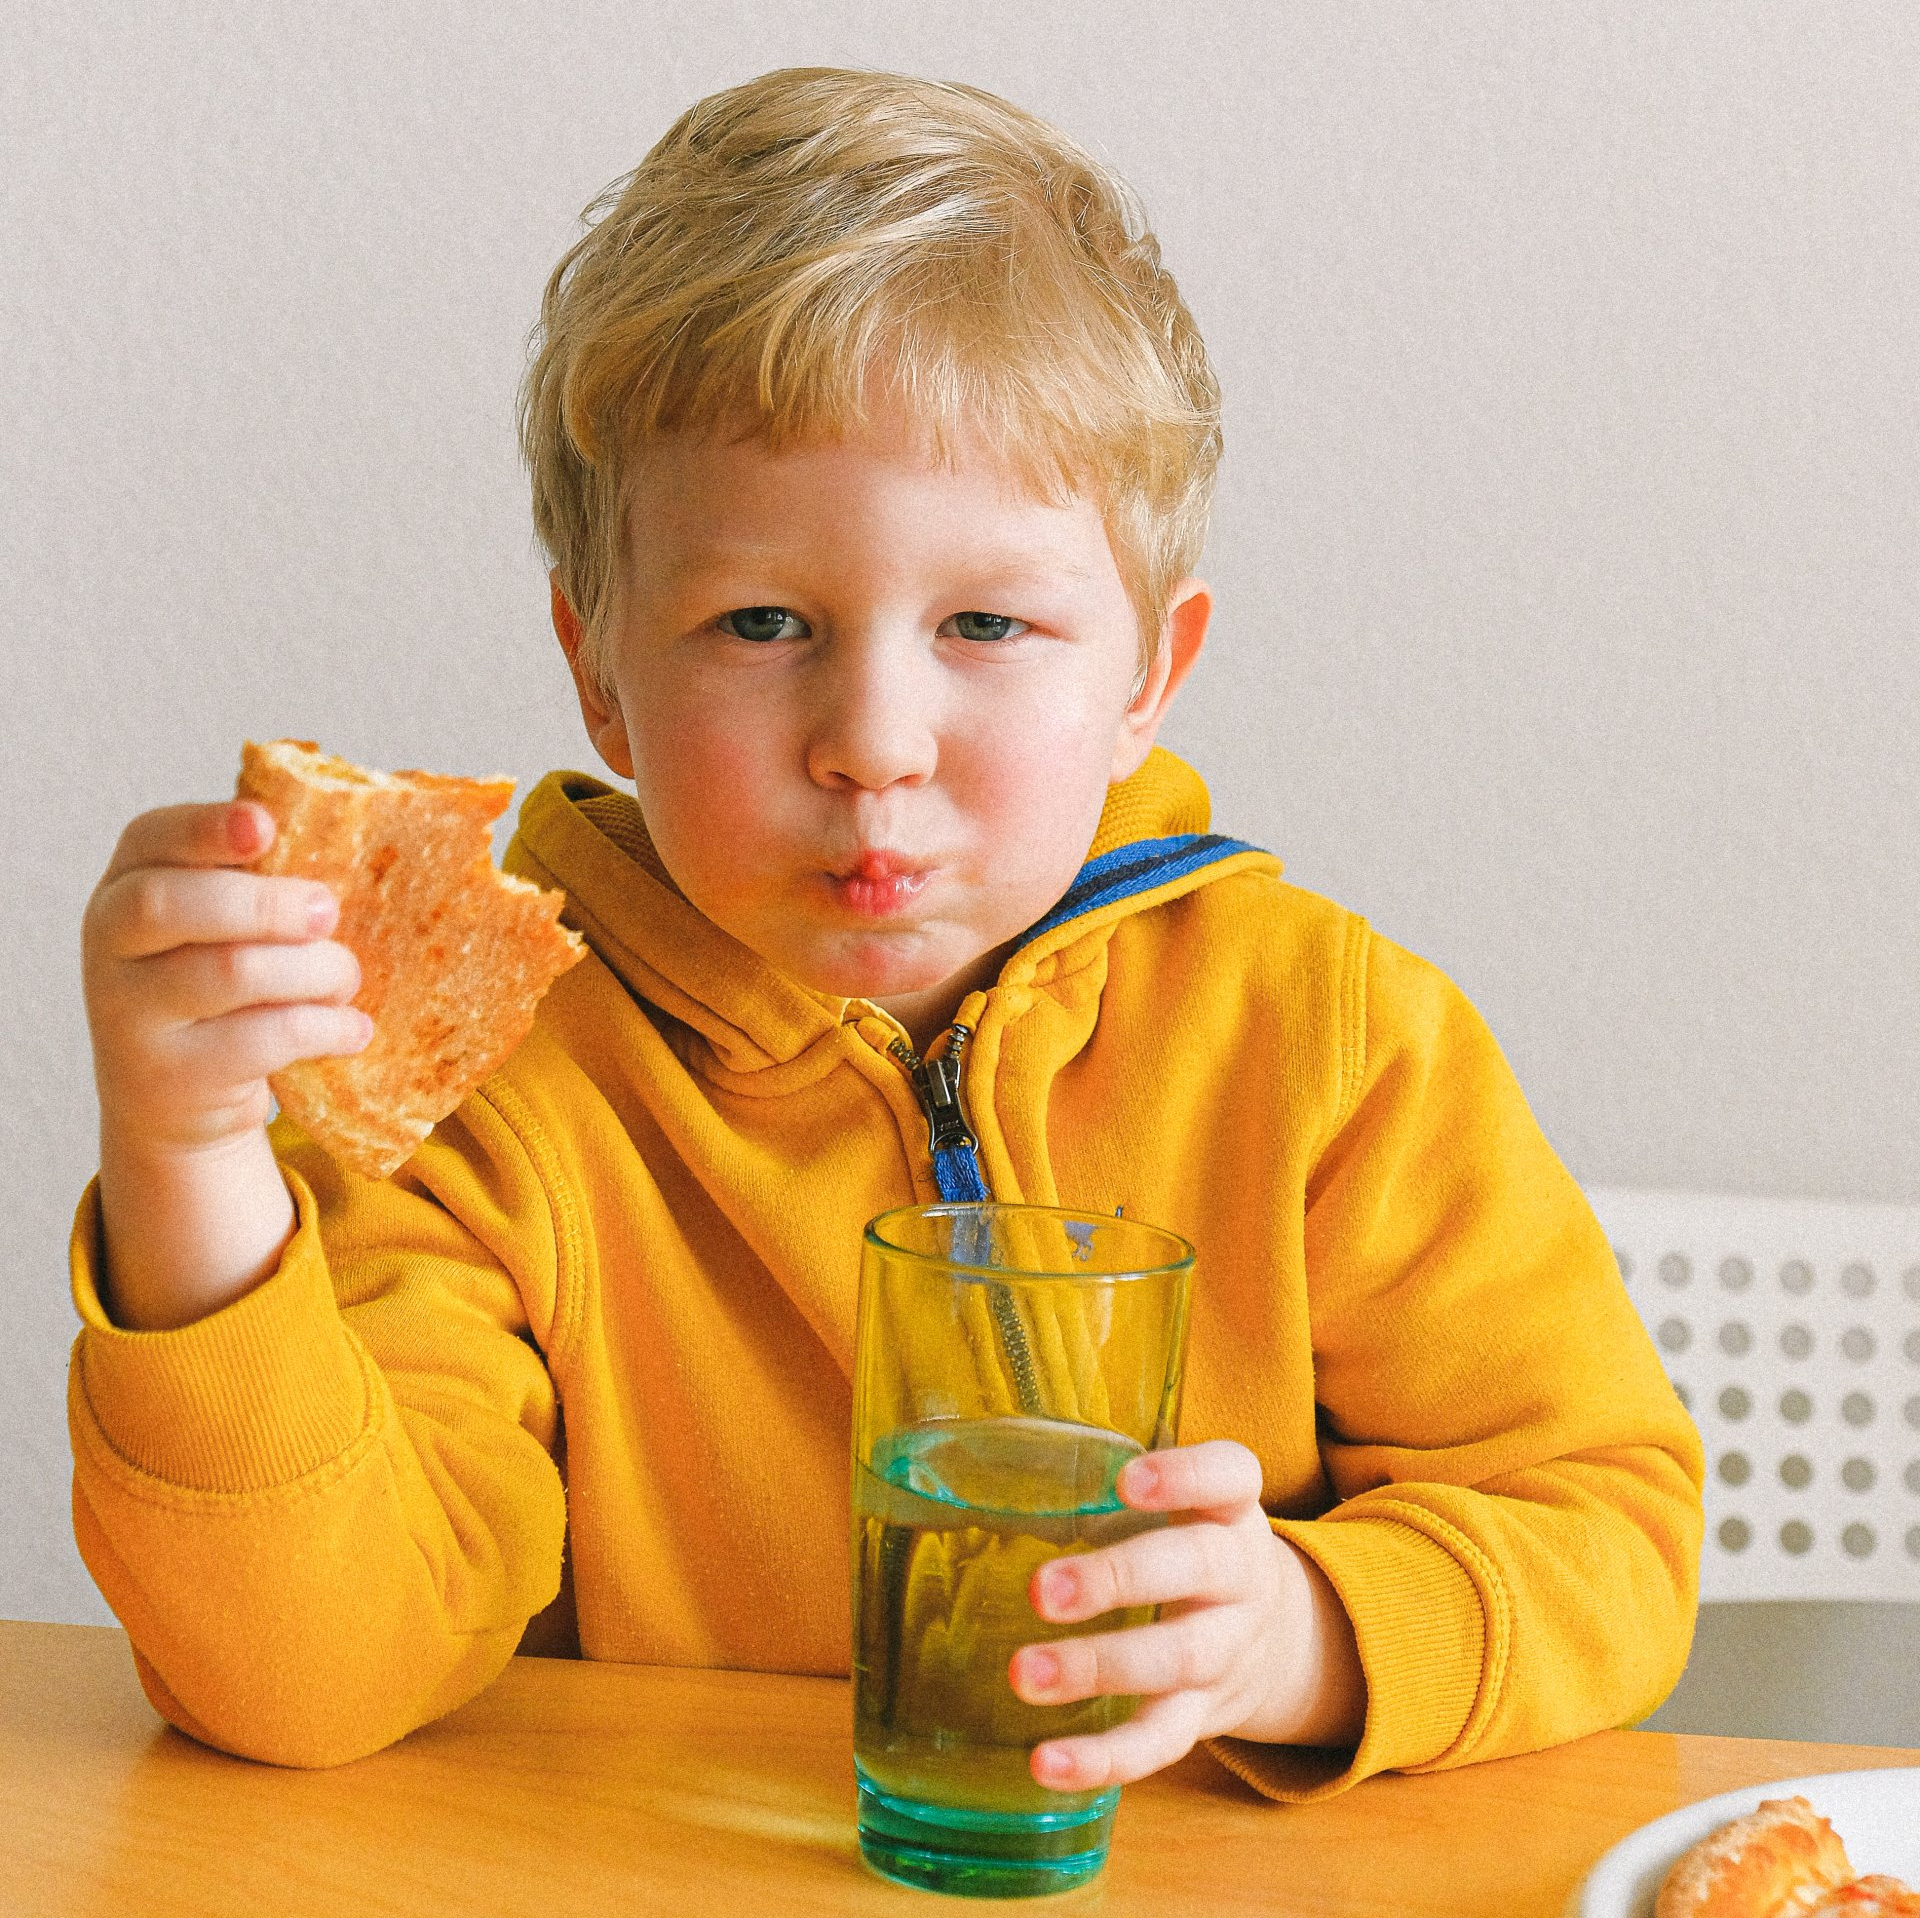 Little boy eating lunch and holding a glass of water